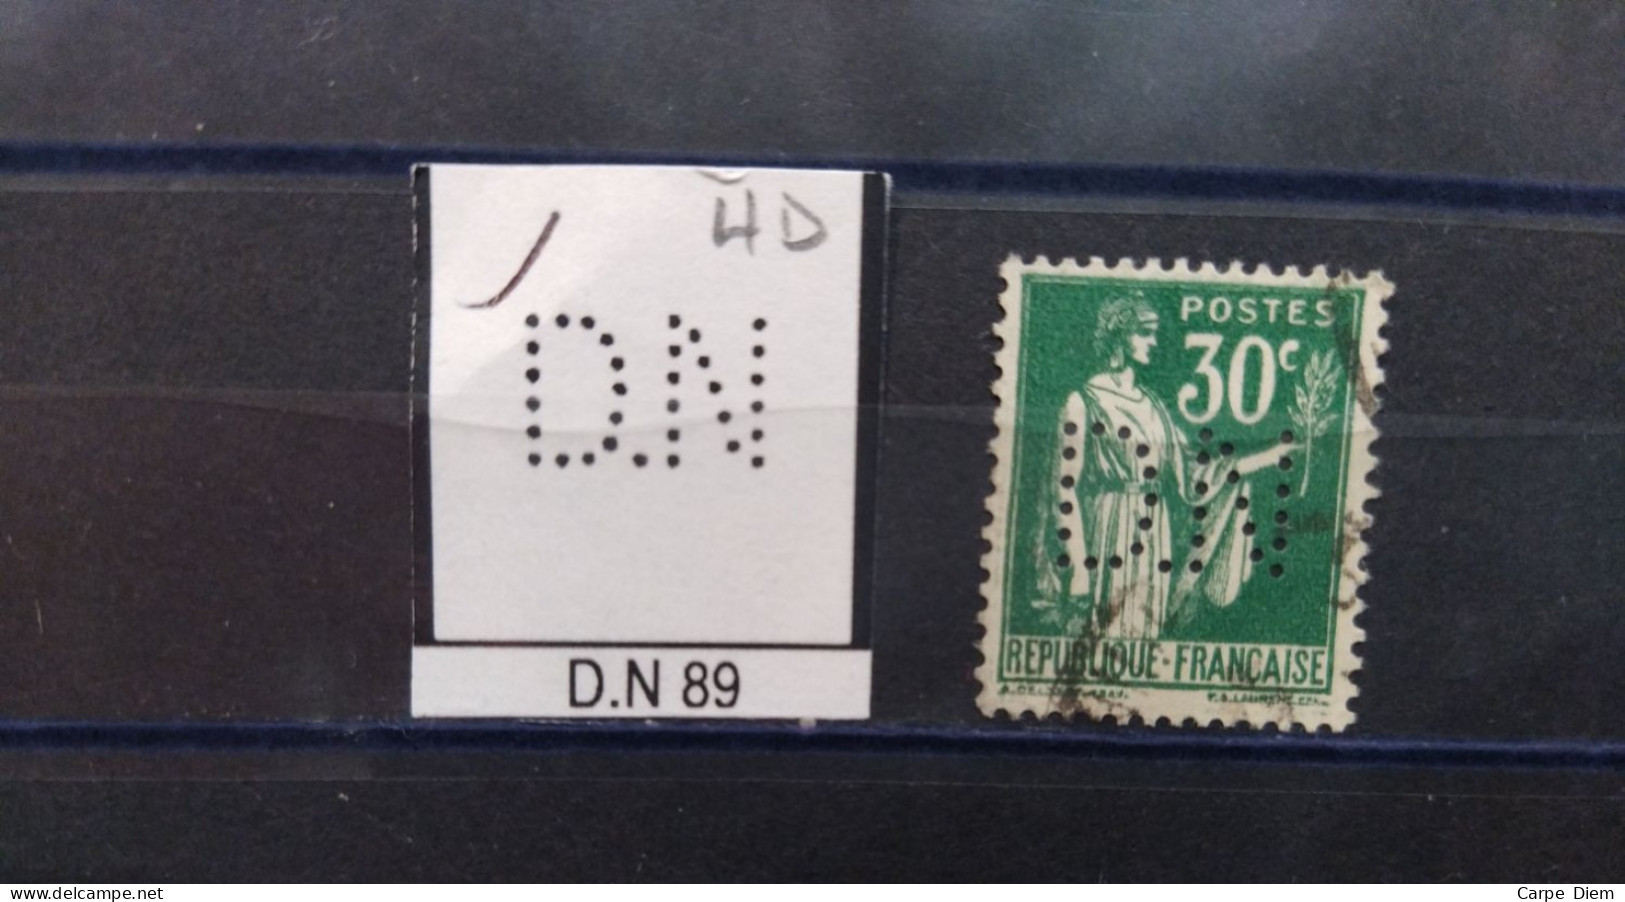 FRANCE D.N 89 TIMBRE DN 89 INDICE 4 SUR 280 PERFORE PERFORES PERFIN PERFINS PERFO PERFORATION PERFORIERT - Oblitérés